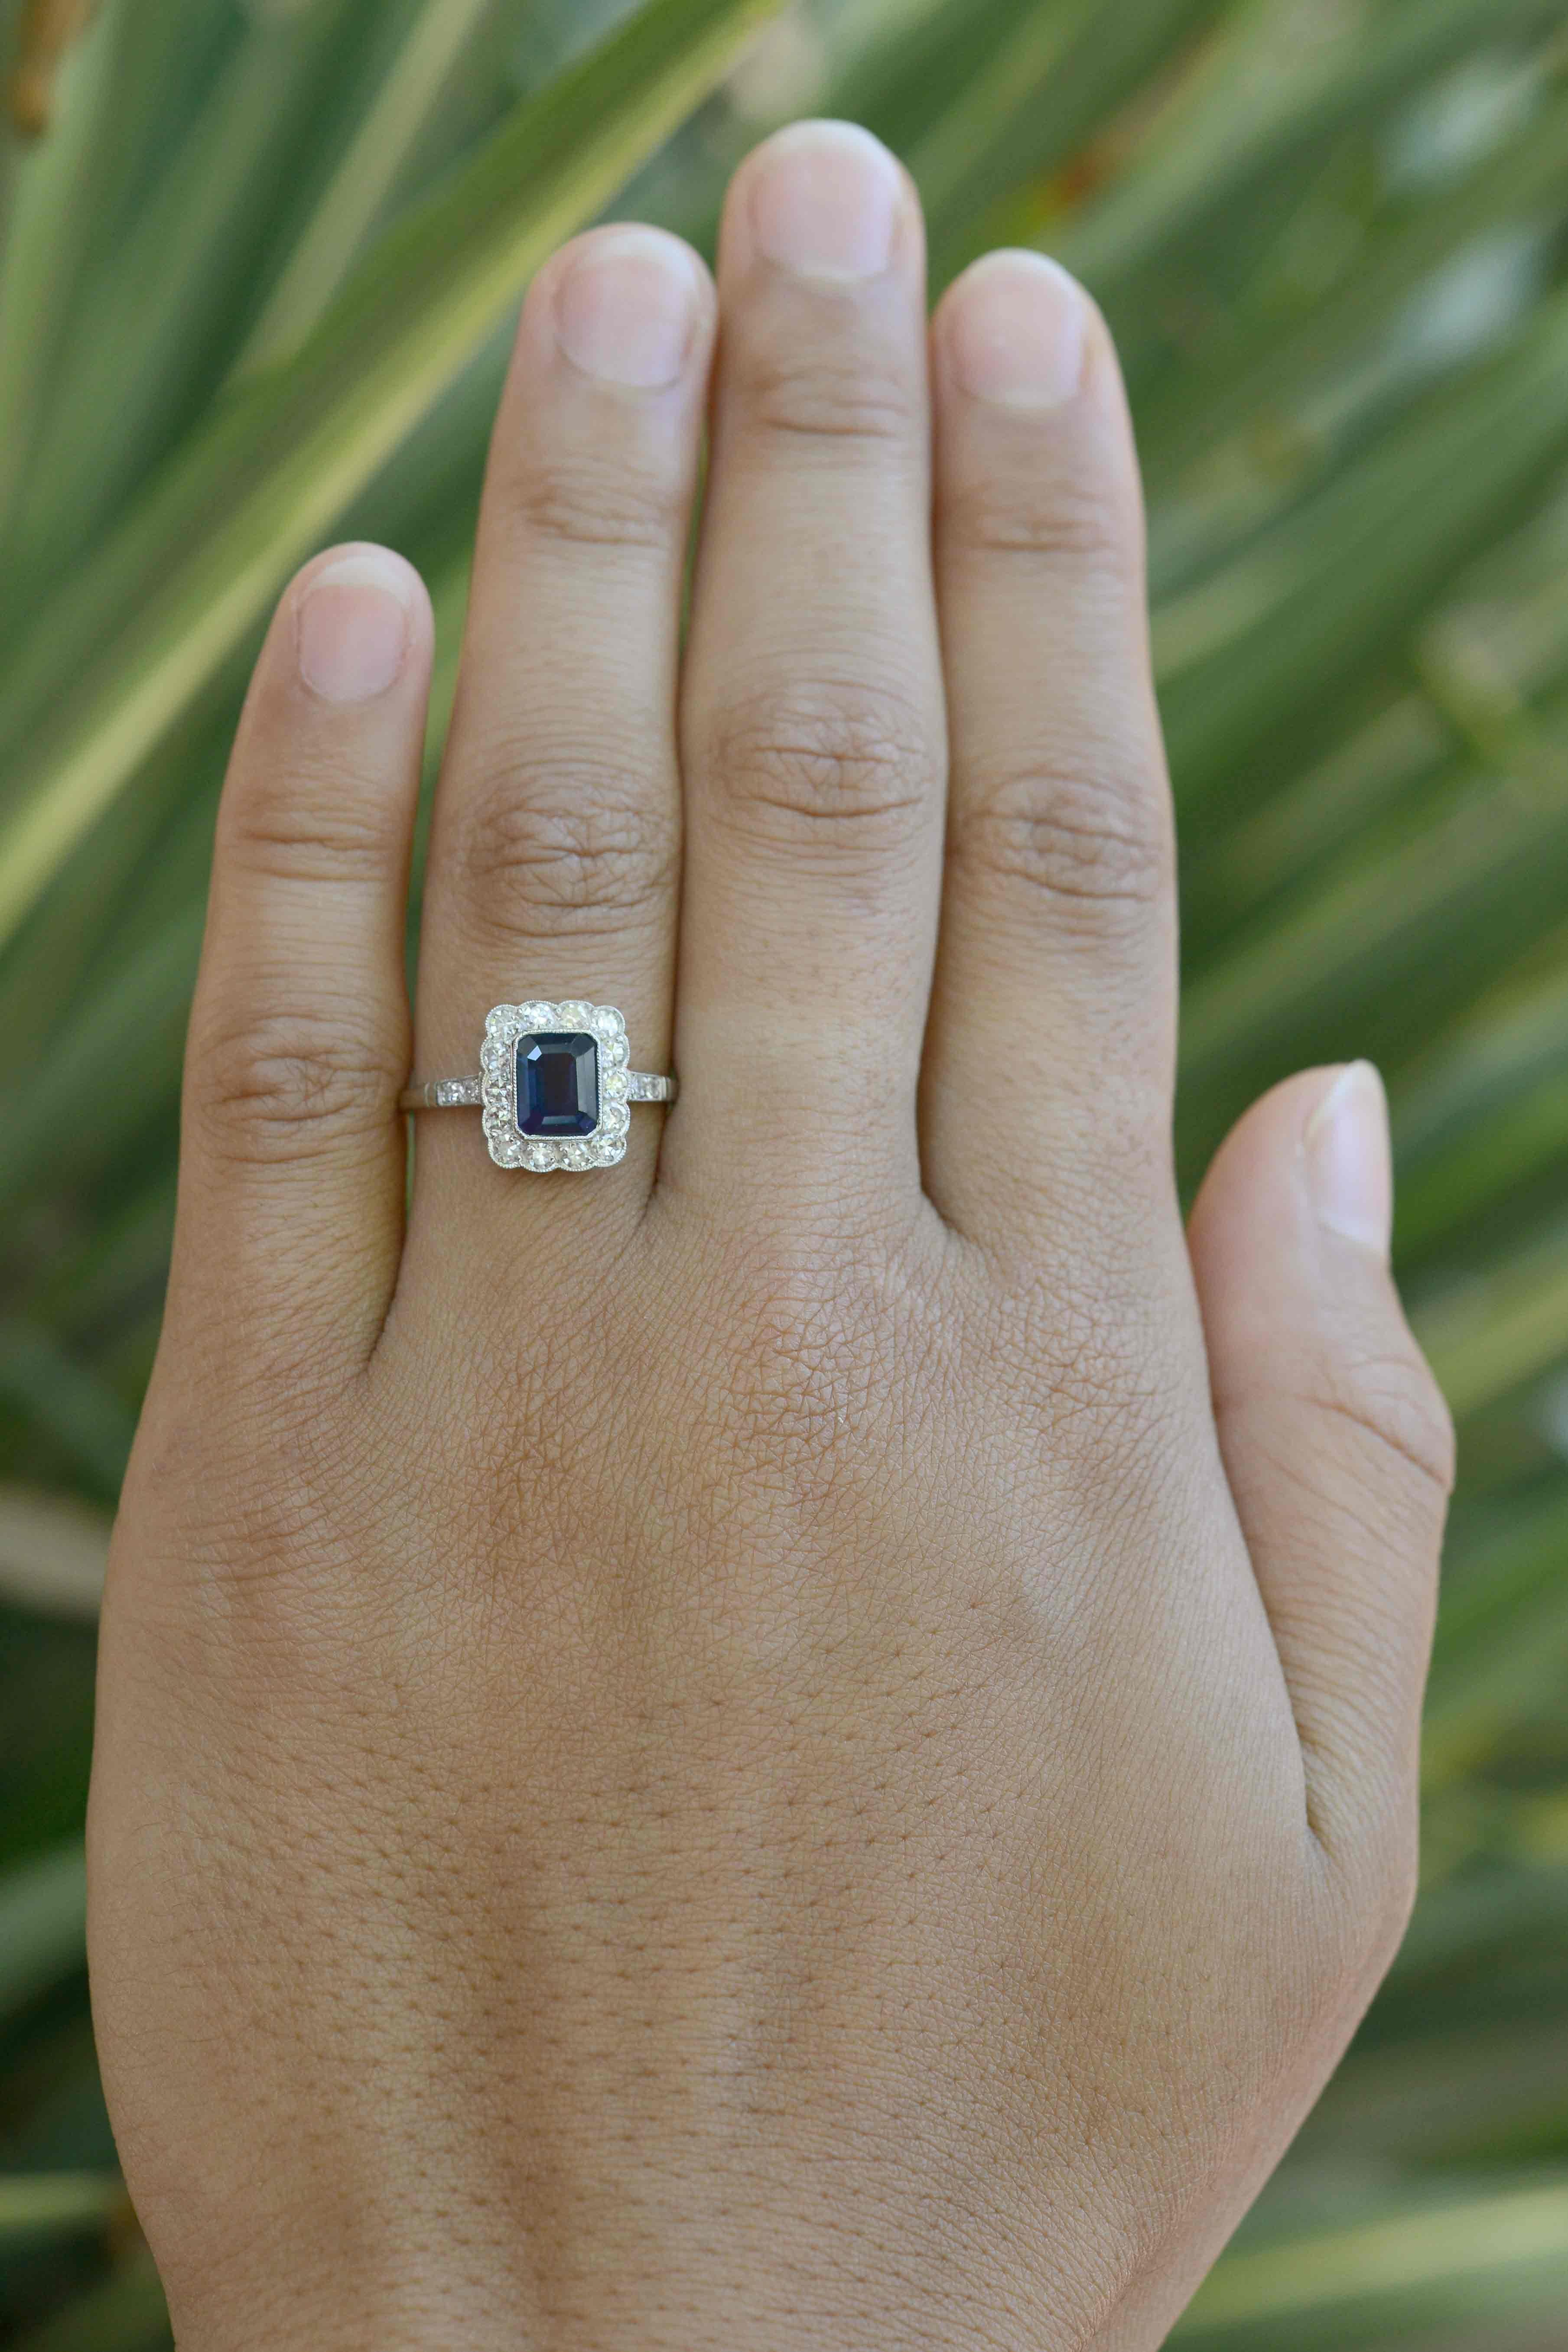 The Jackson 2 carat Art Deco Style sapphire engagement ring. Floating in a pool of diamonds is a most richly saturated deep blue, emerald cut sapphire in a dainty, scalloped millegrained bezel. We love the halo exhibiting an enchanting, undulating